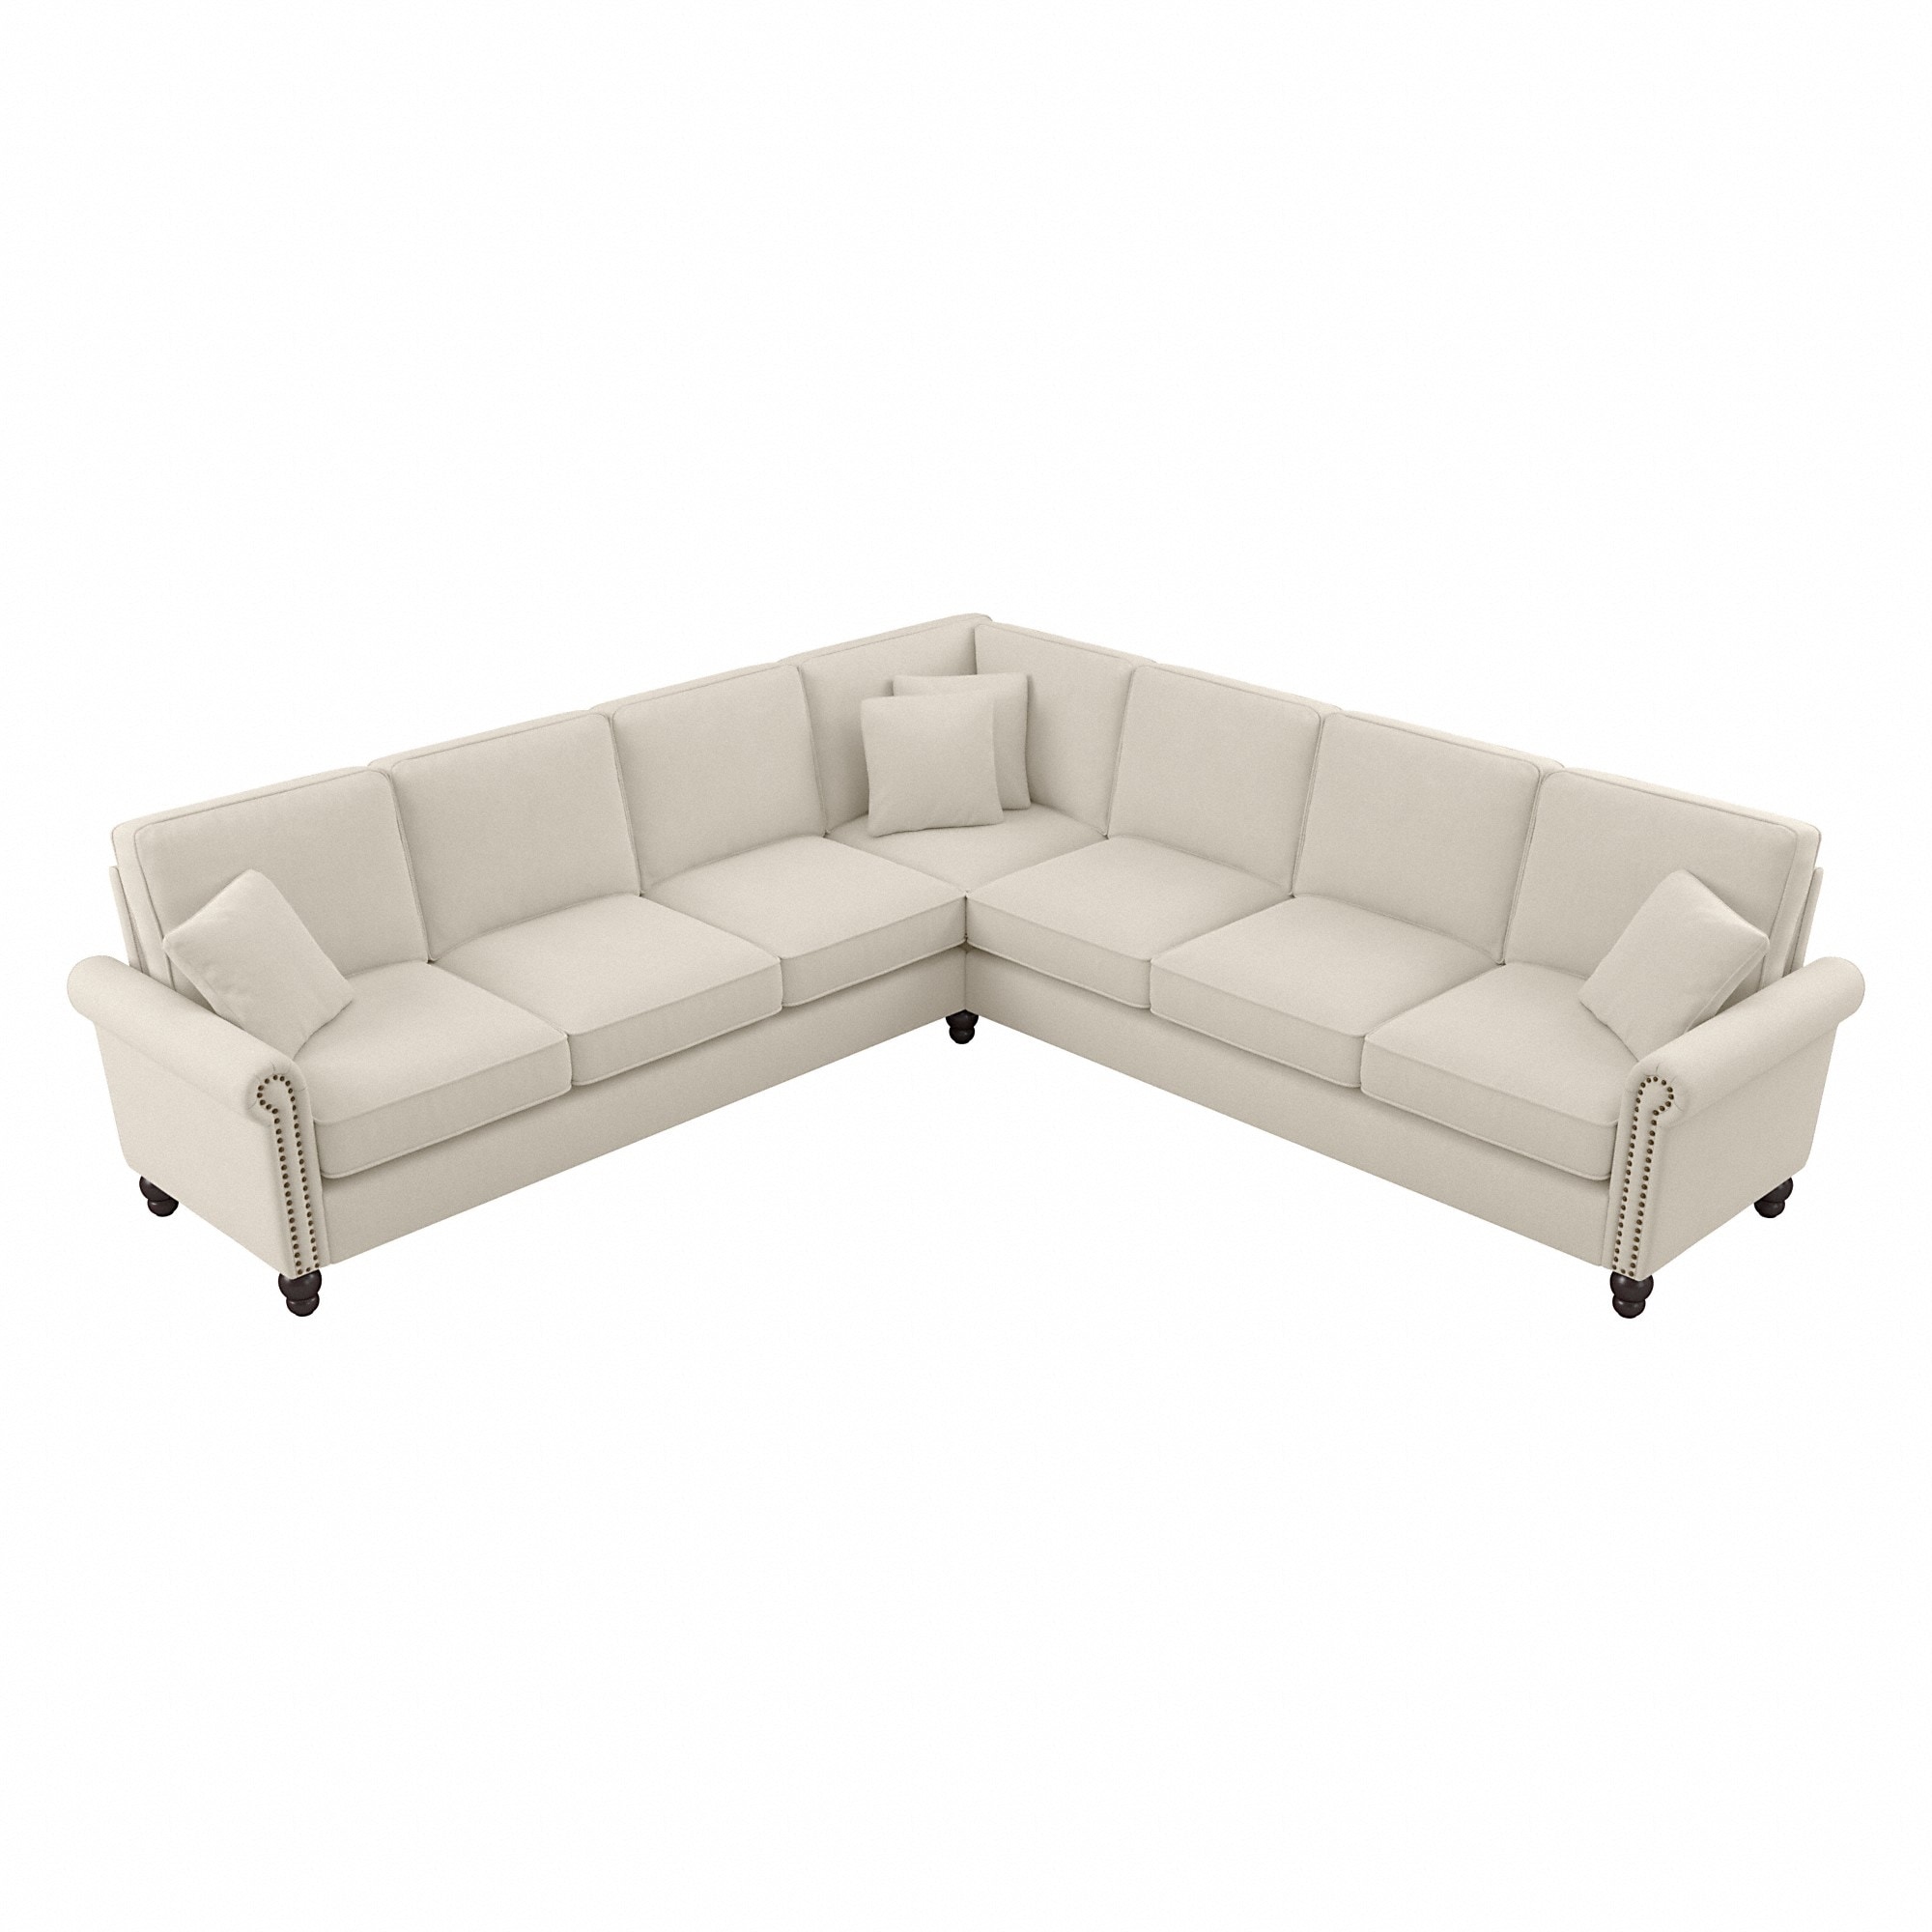 Bush Furniture Coventry 111W L Shaped Sectional Couch by